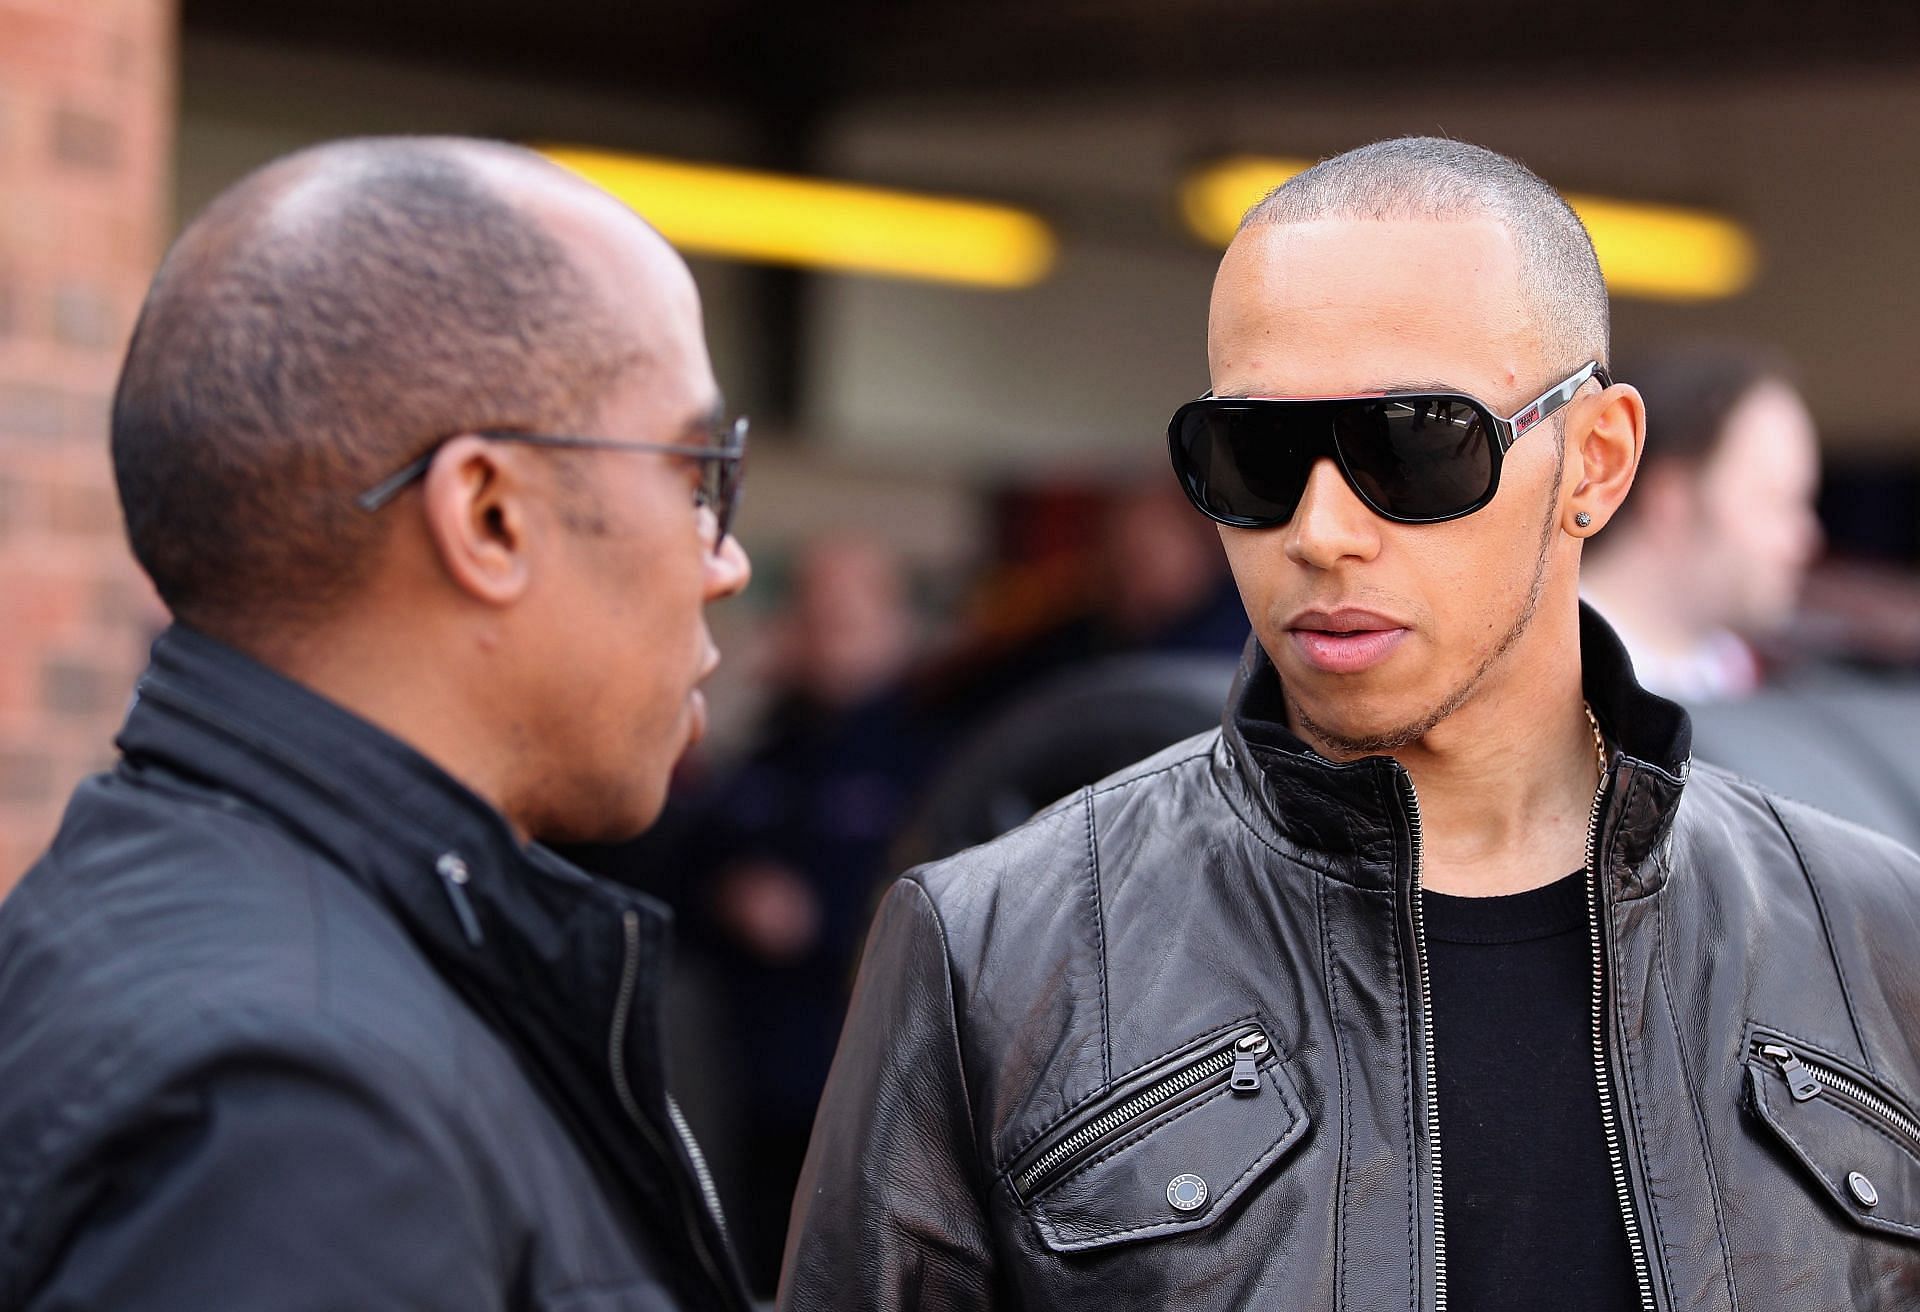 Lewis Hamilton (right) with his father Anthony Hamilton (left) at Brands Hatch